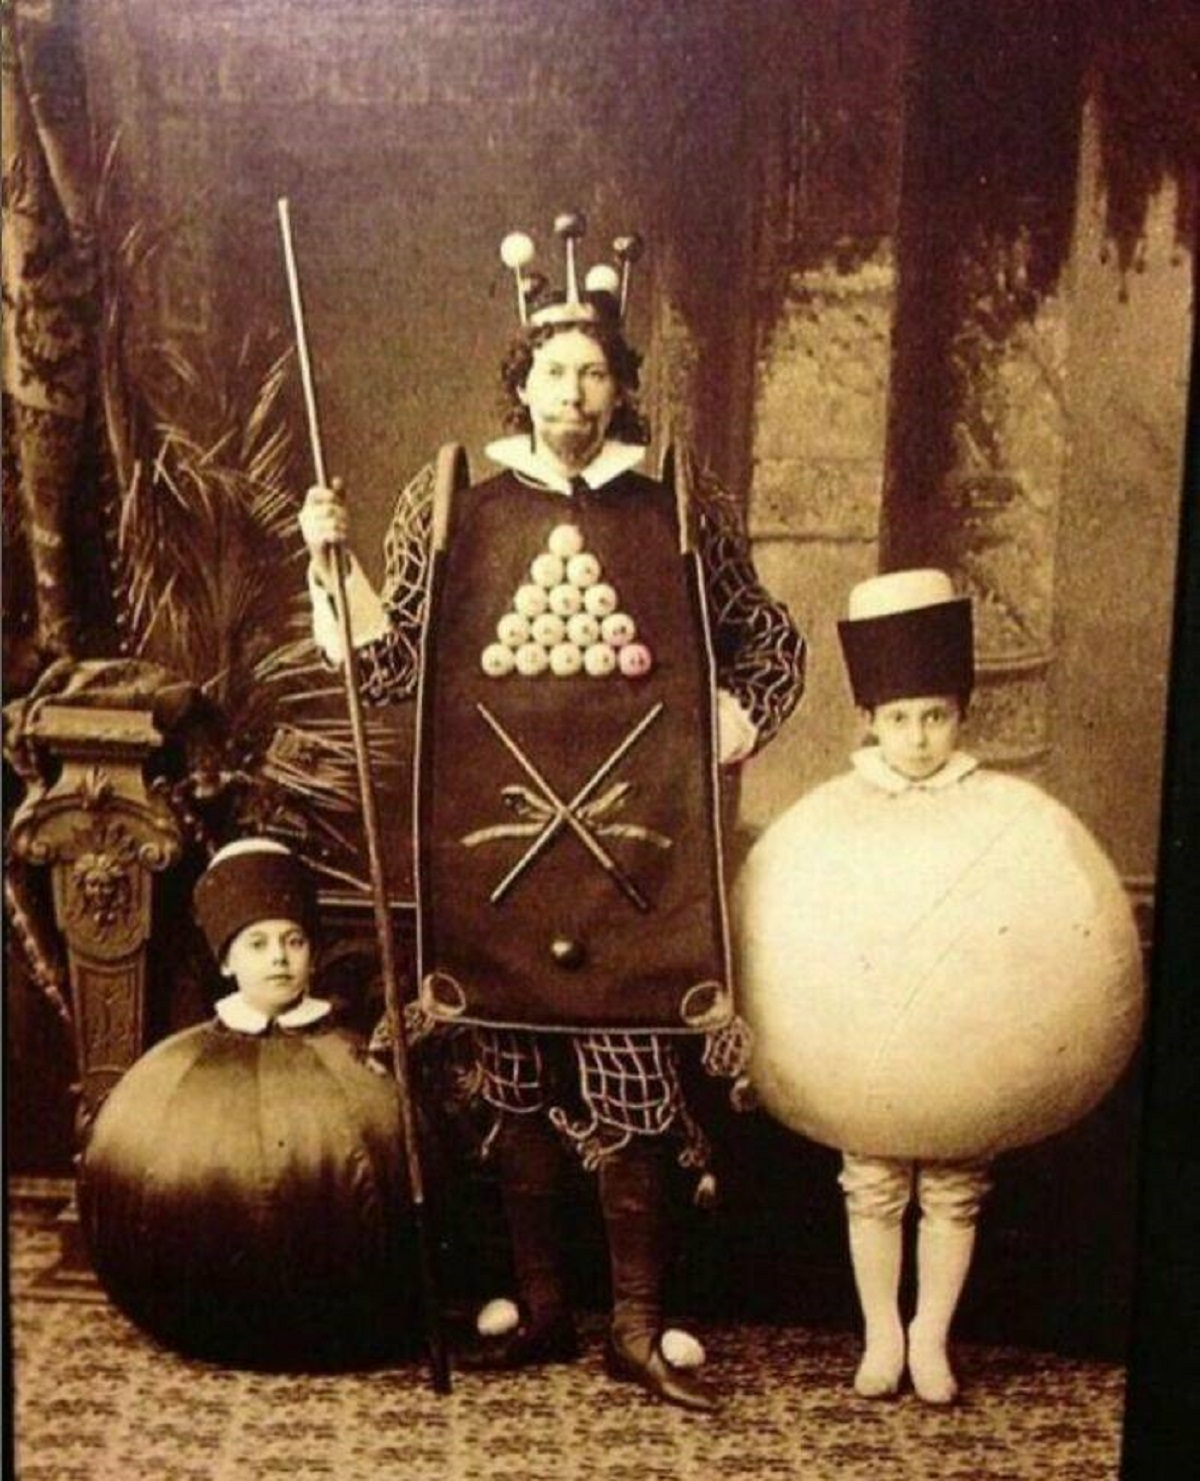 "Celebrating Halloween In 1886: A Man Adorns Himself As The Billiards King While His Two Sons Attire As The 8 Ball And Cue Ball"